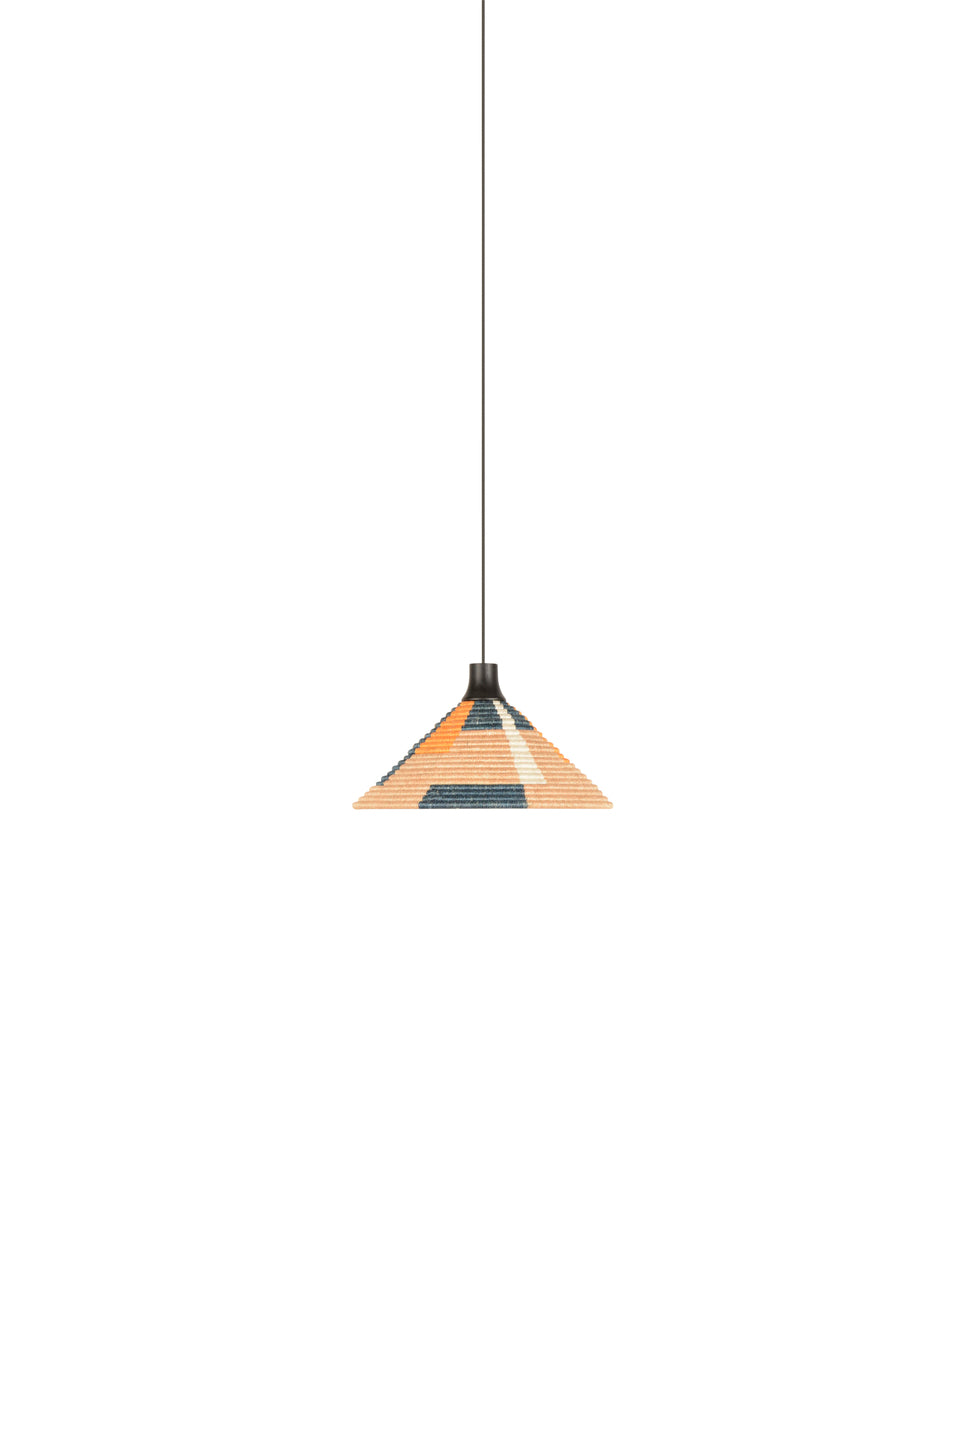 Parrot Small Pendant Light by Forestier